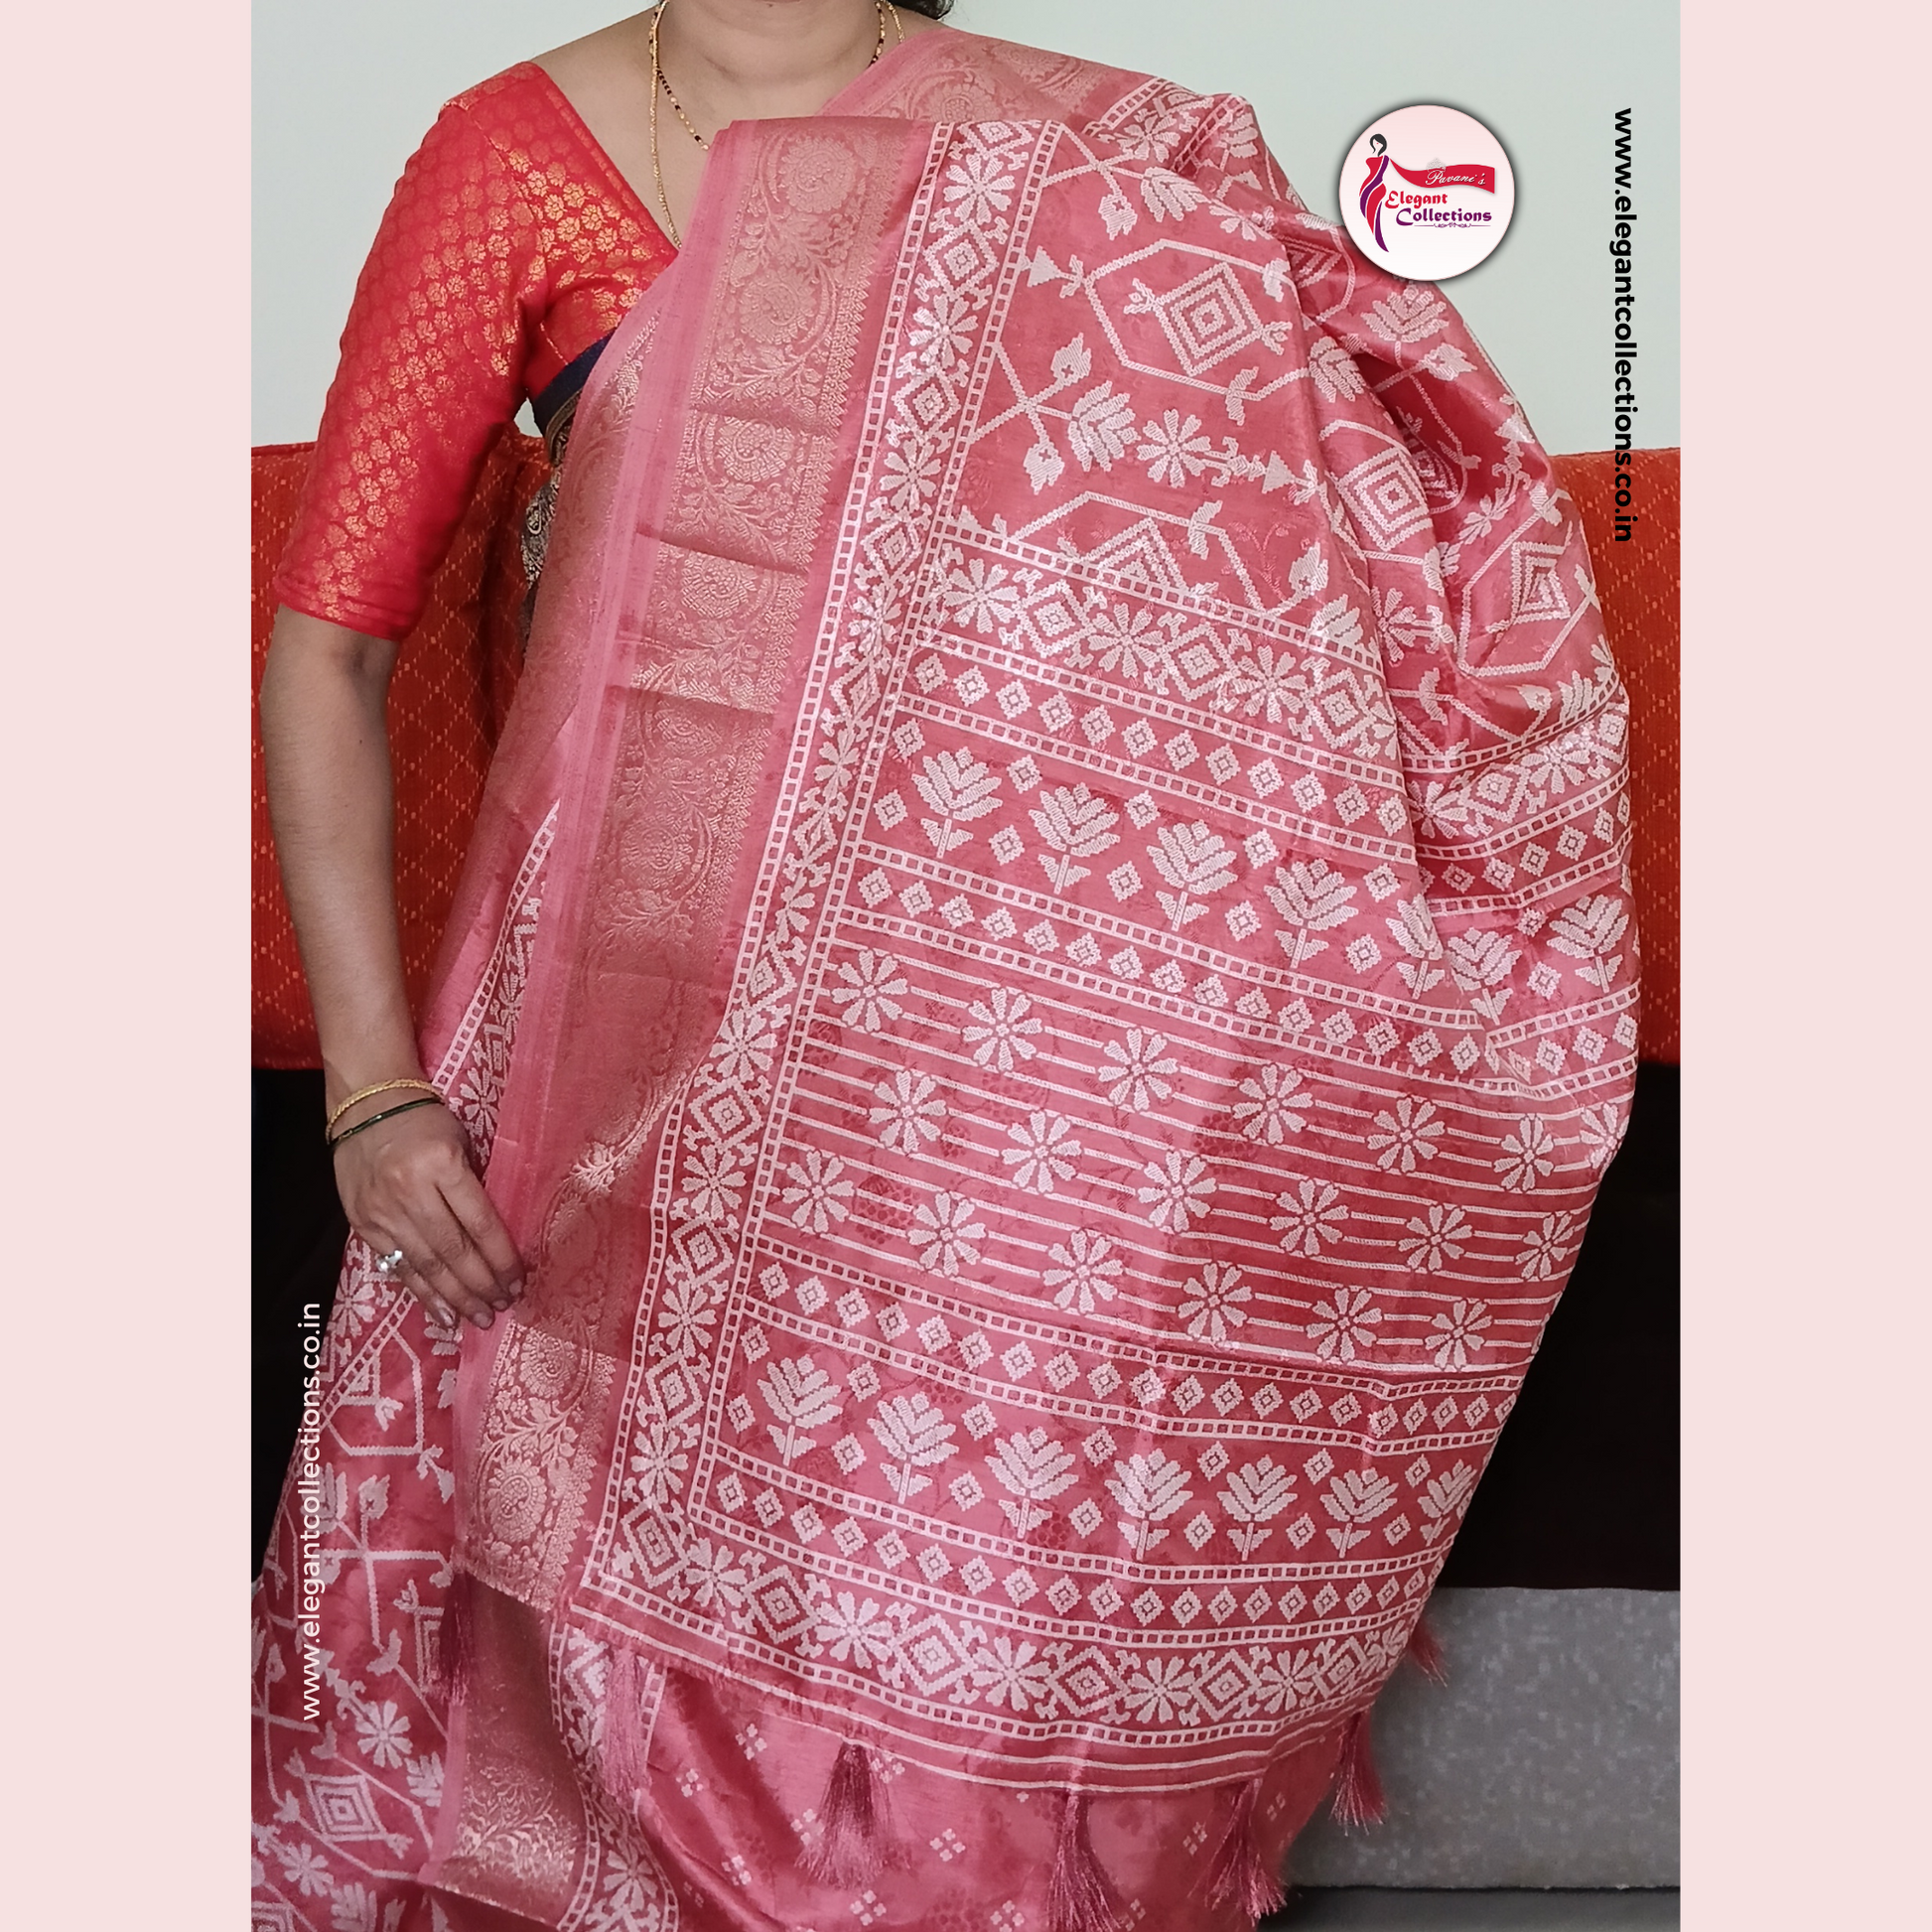 FANCY SILK SAREE - BABY PINK - WITH GEOMETRICAL PATTERN - JACQUARD WOVEN BORDER - Pavani's Elegant Collections